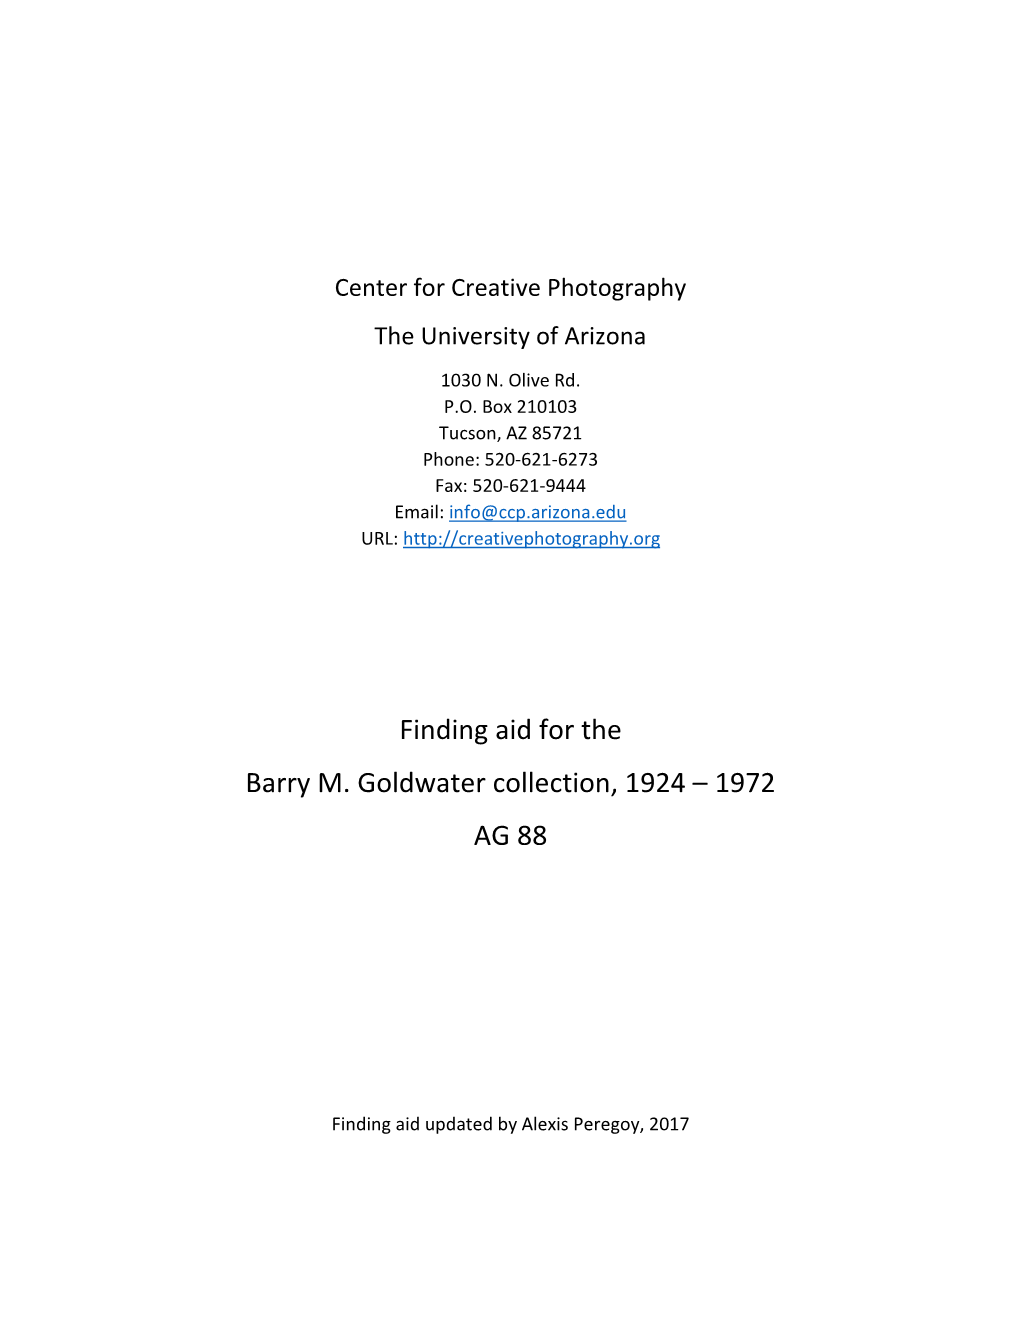 Finding Aid for the Barry M. Goldwater Archive